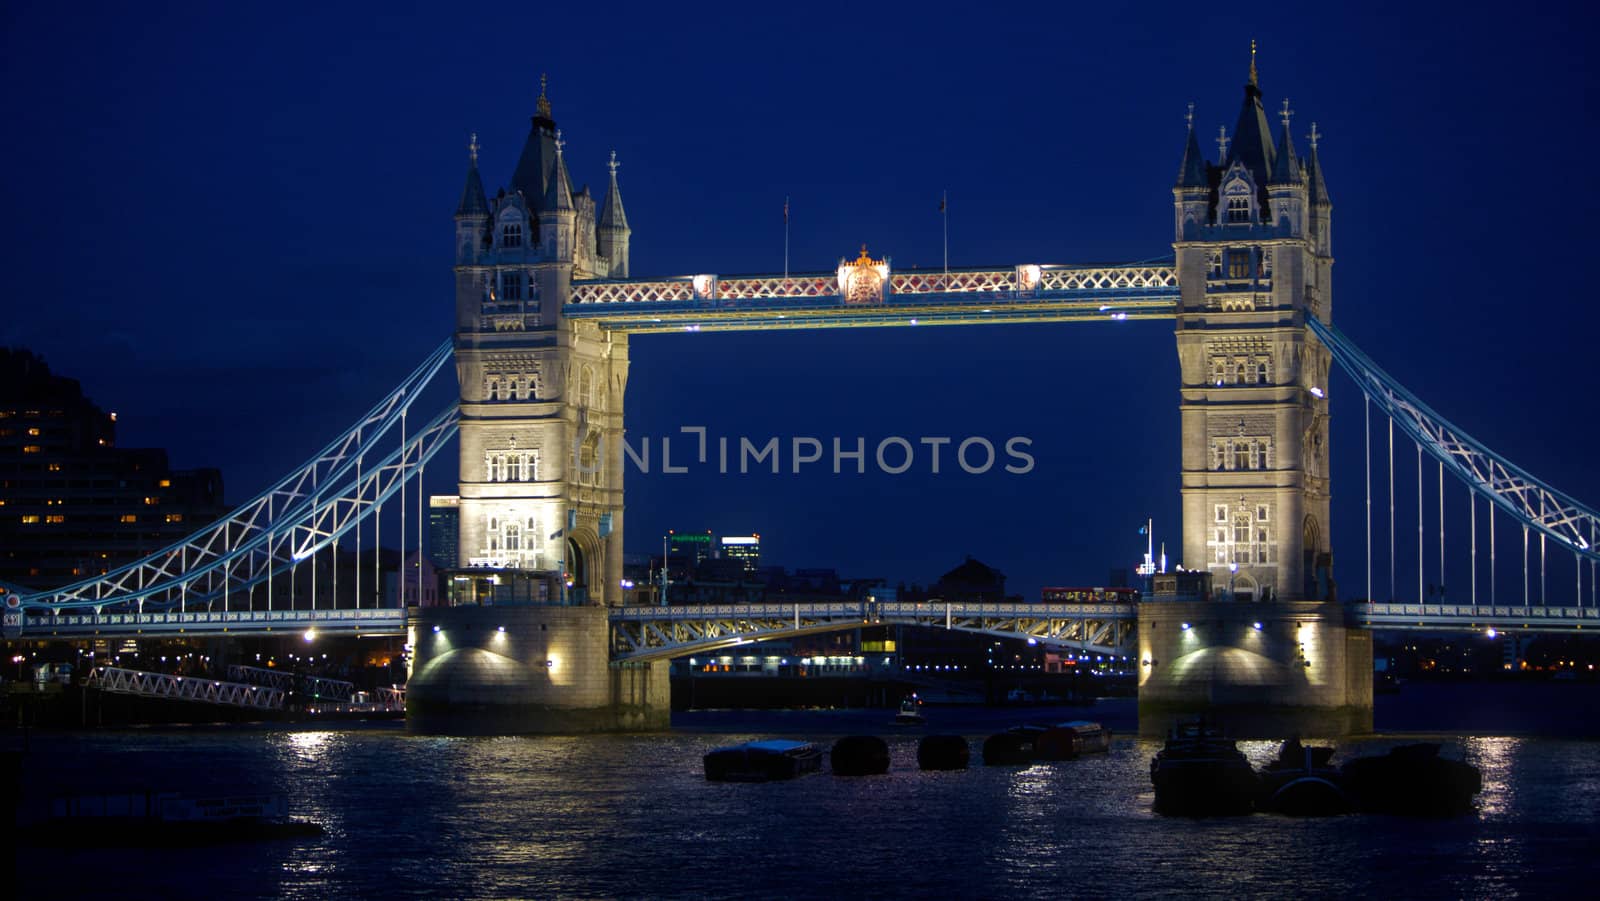 The tower bridge in London England at night. It was completed in 1894 and is a famous landmark for tourists and travel